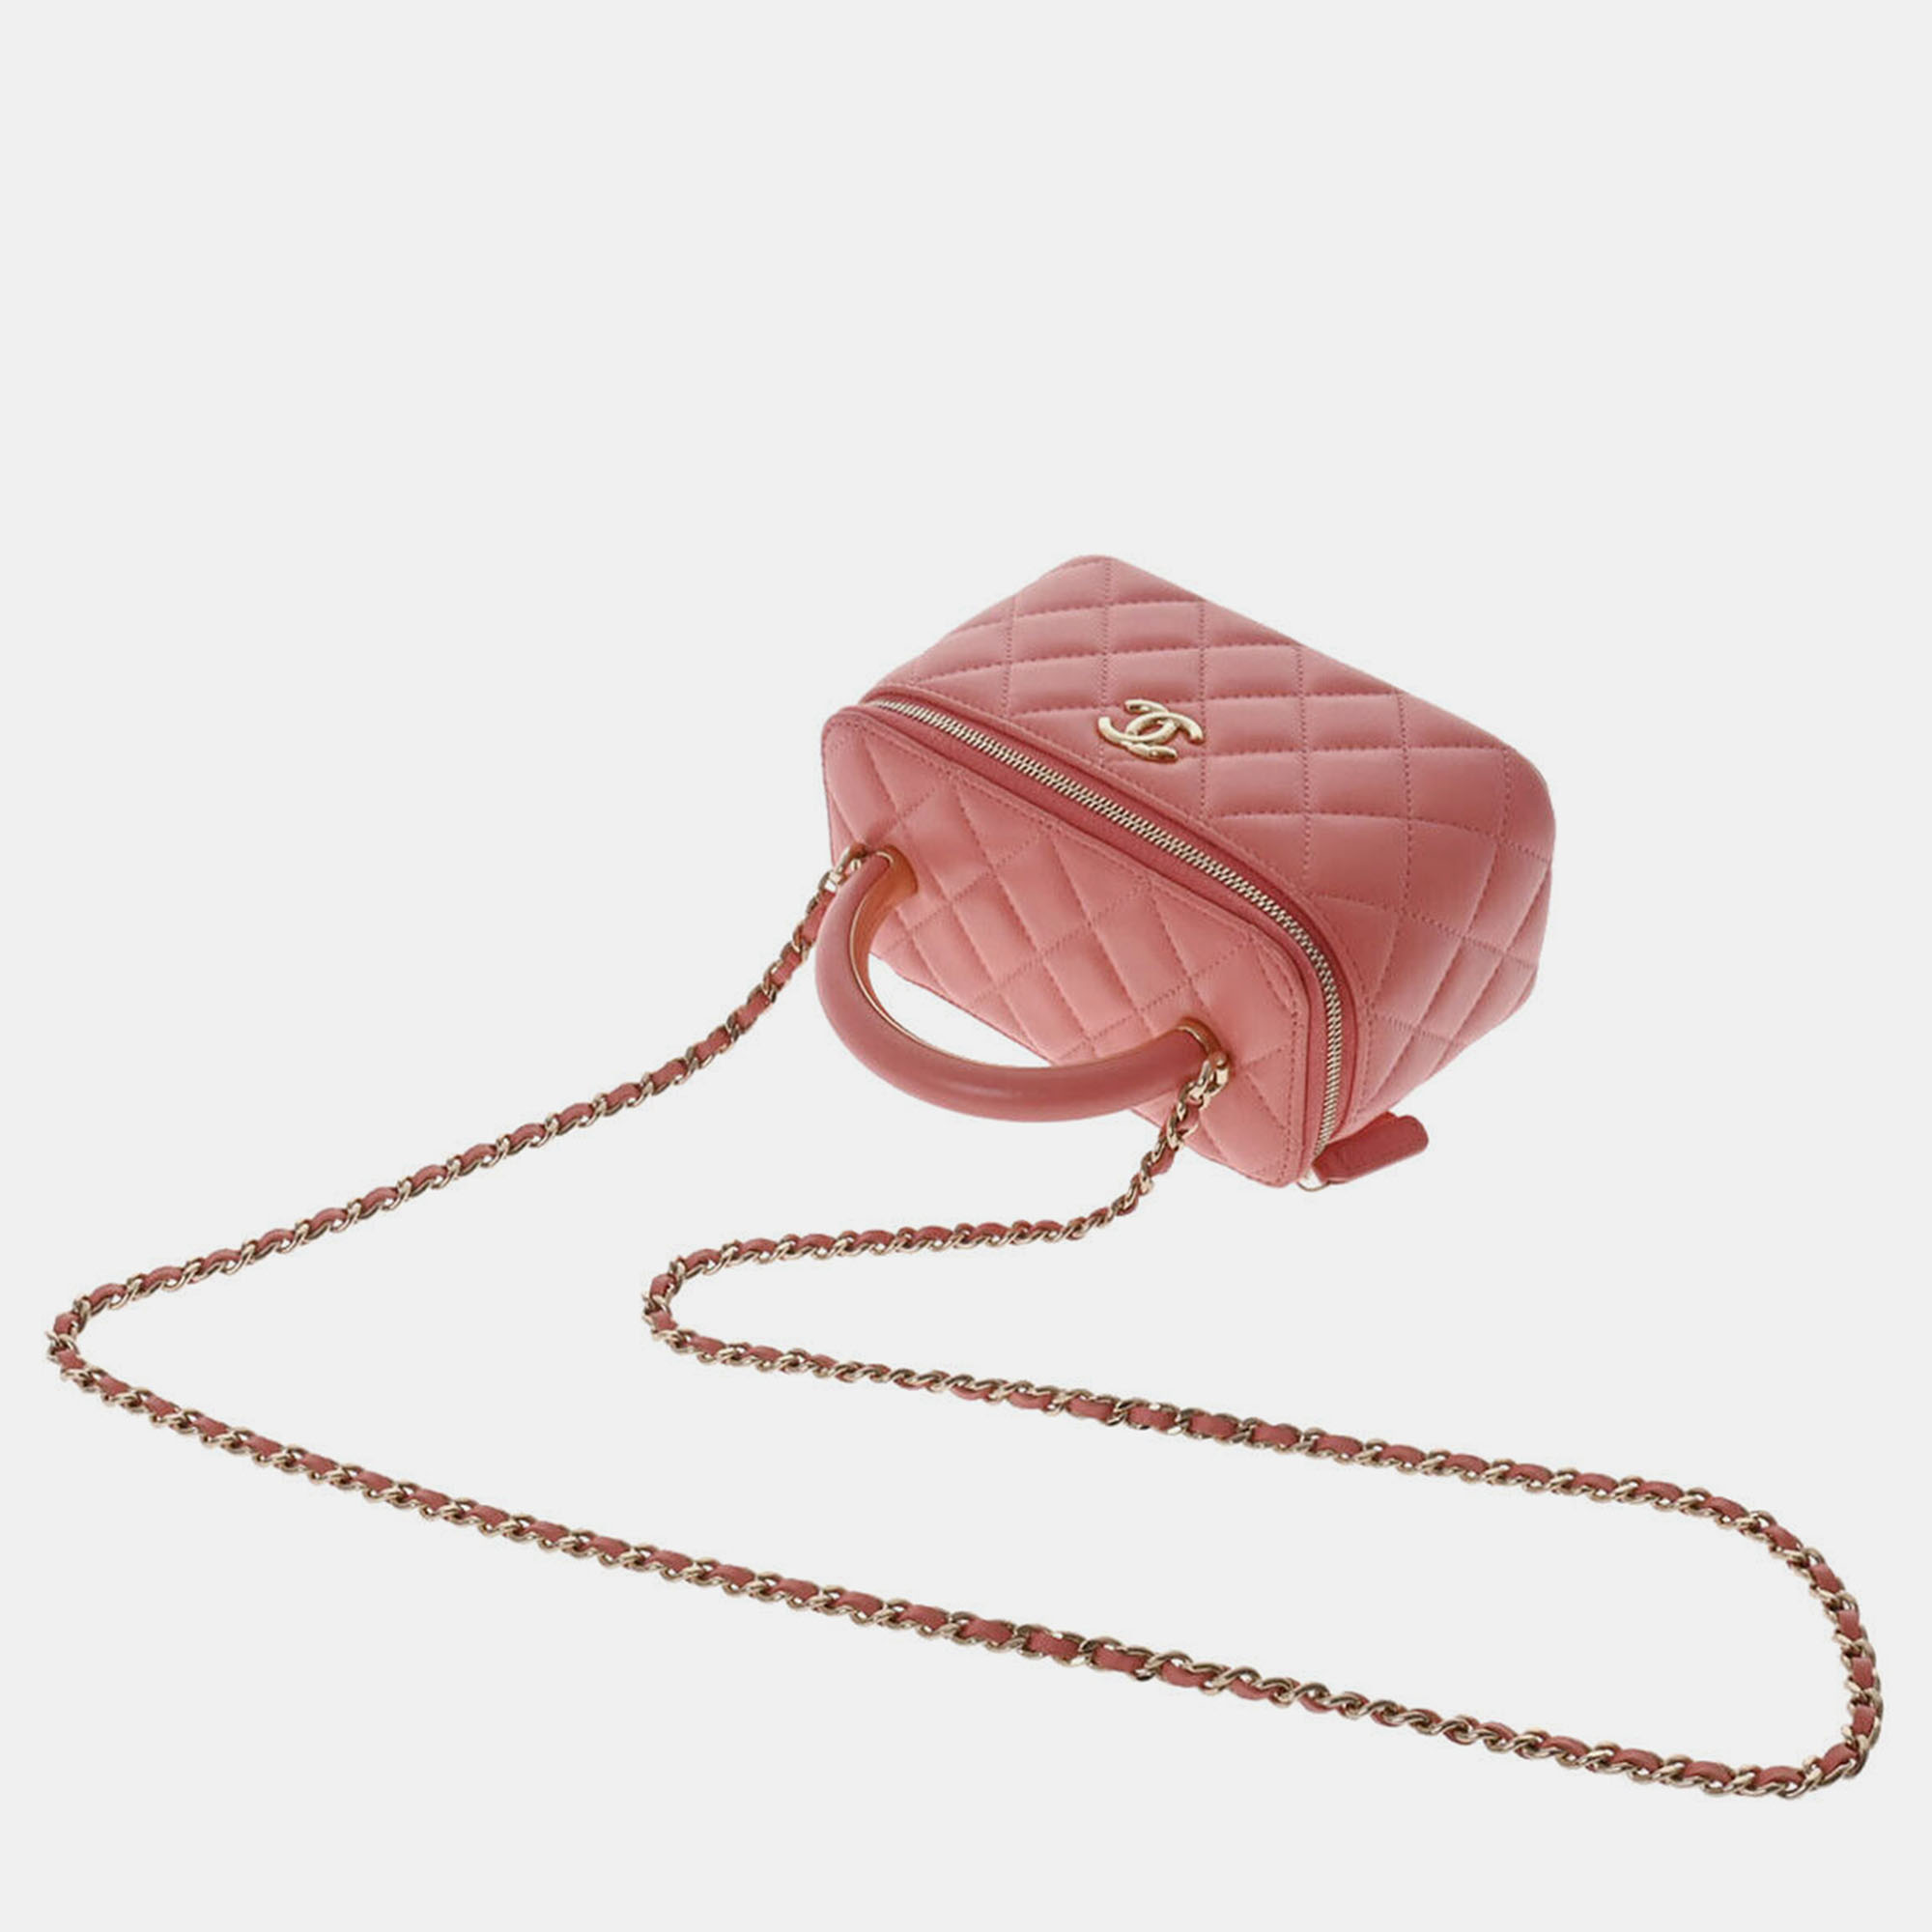 Chanel Pink Leather Vanity Case